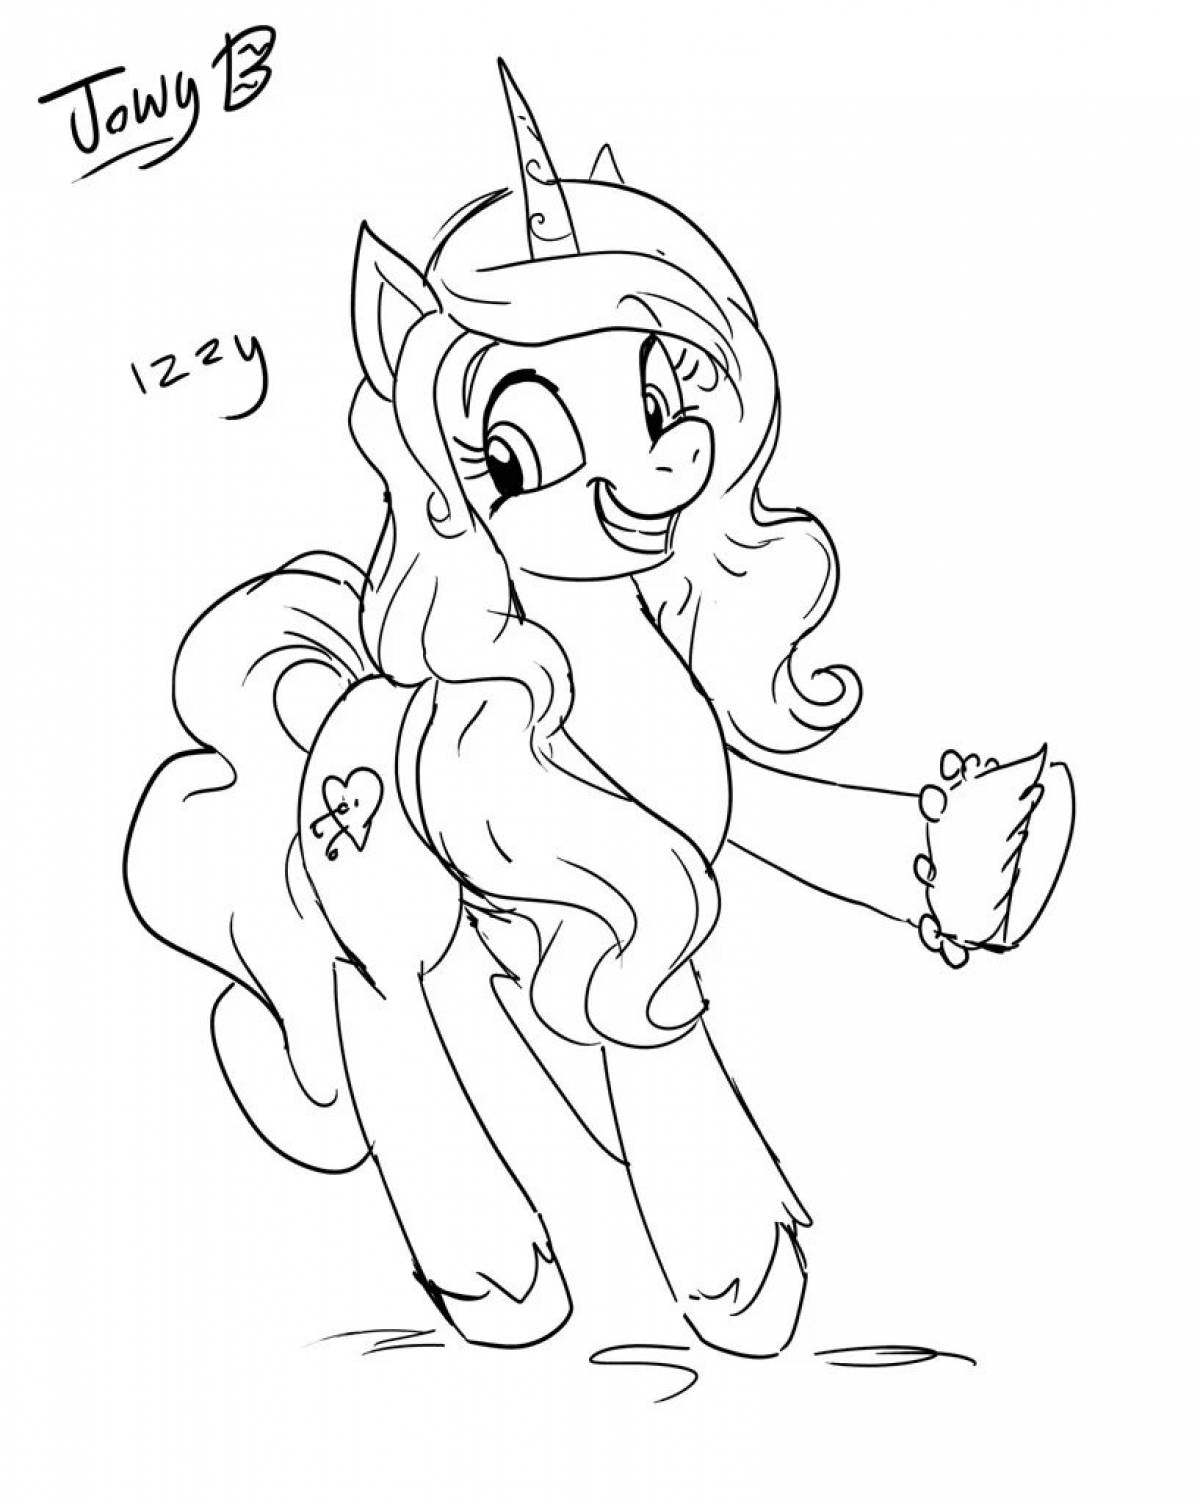 Easy pony coloring page animated